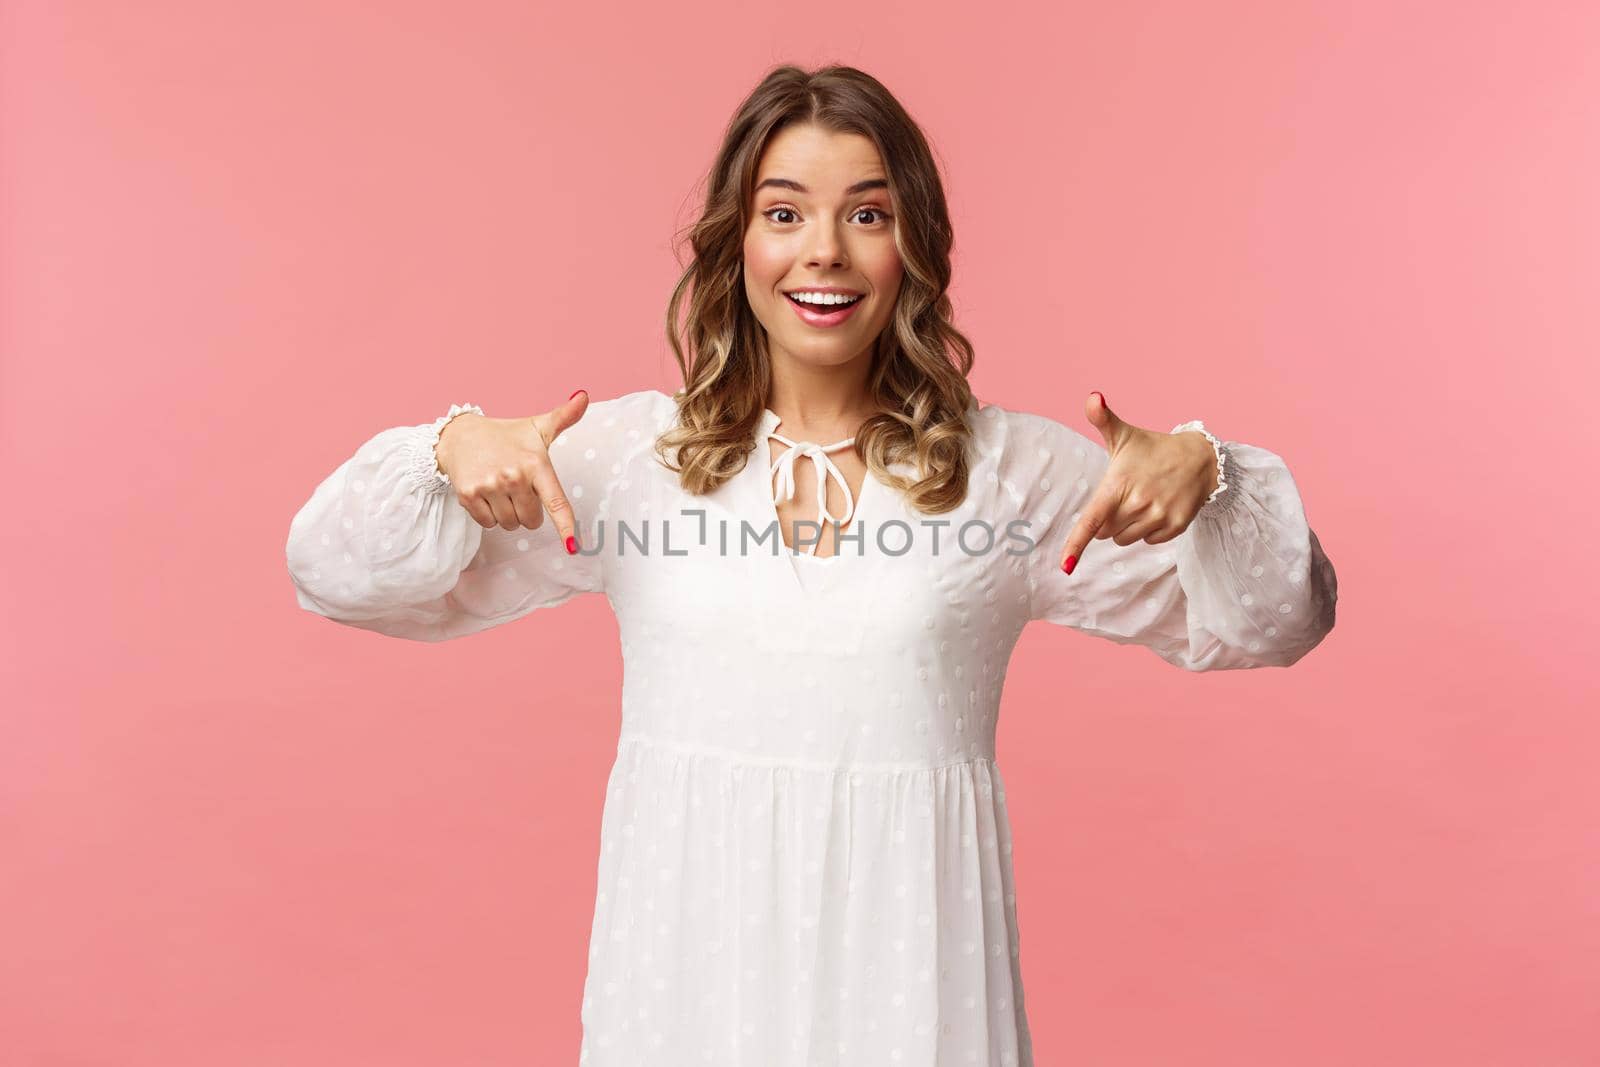 Portrait of enthusiastic upbeat young blond woman pointing fingers down to invite you check-out product, showing bottom advertisement, smiling camera cheerful, spring concept, pink background.